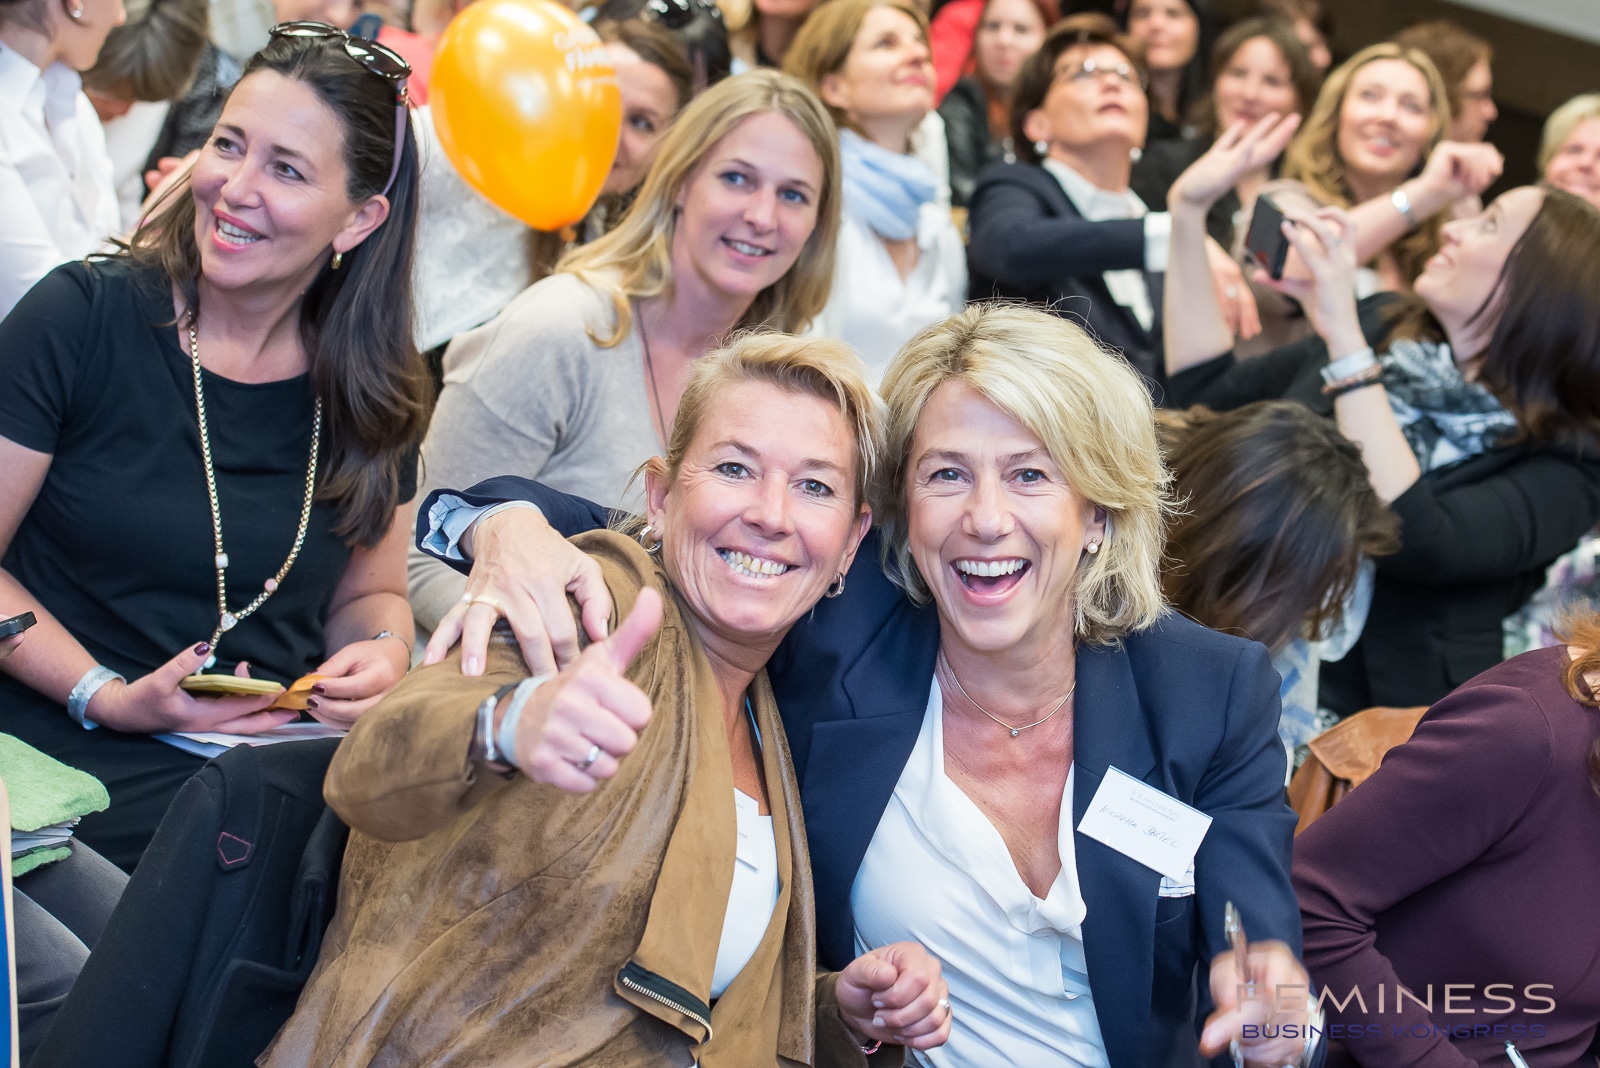 Feminess Business Kongress - Georg Beyer Pictures